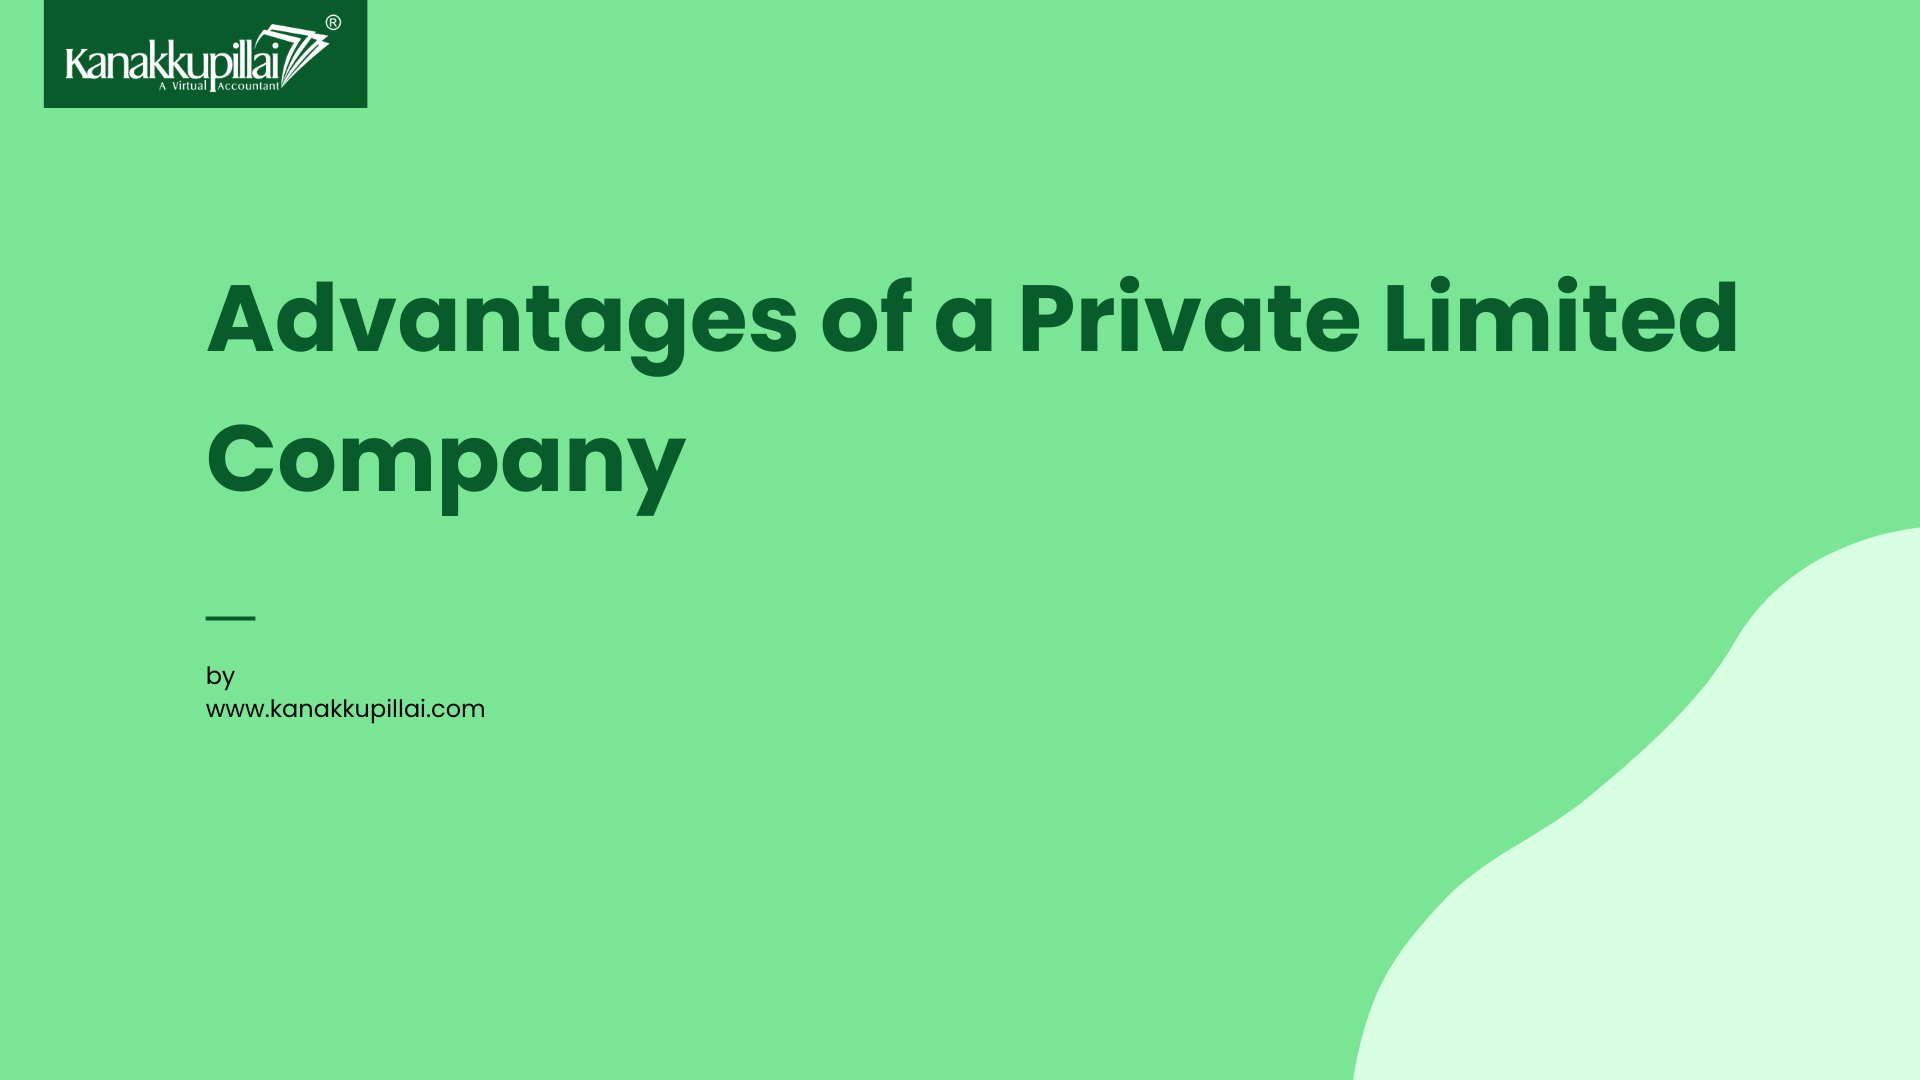 Advantages of a Private Limited Company